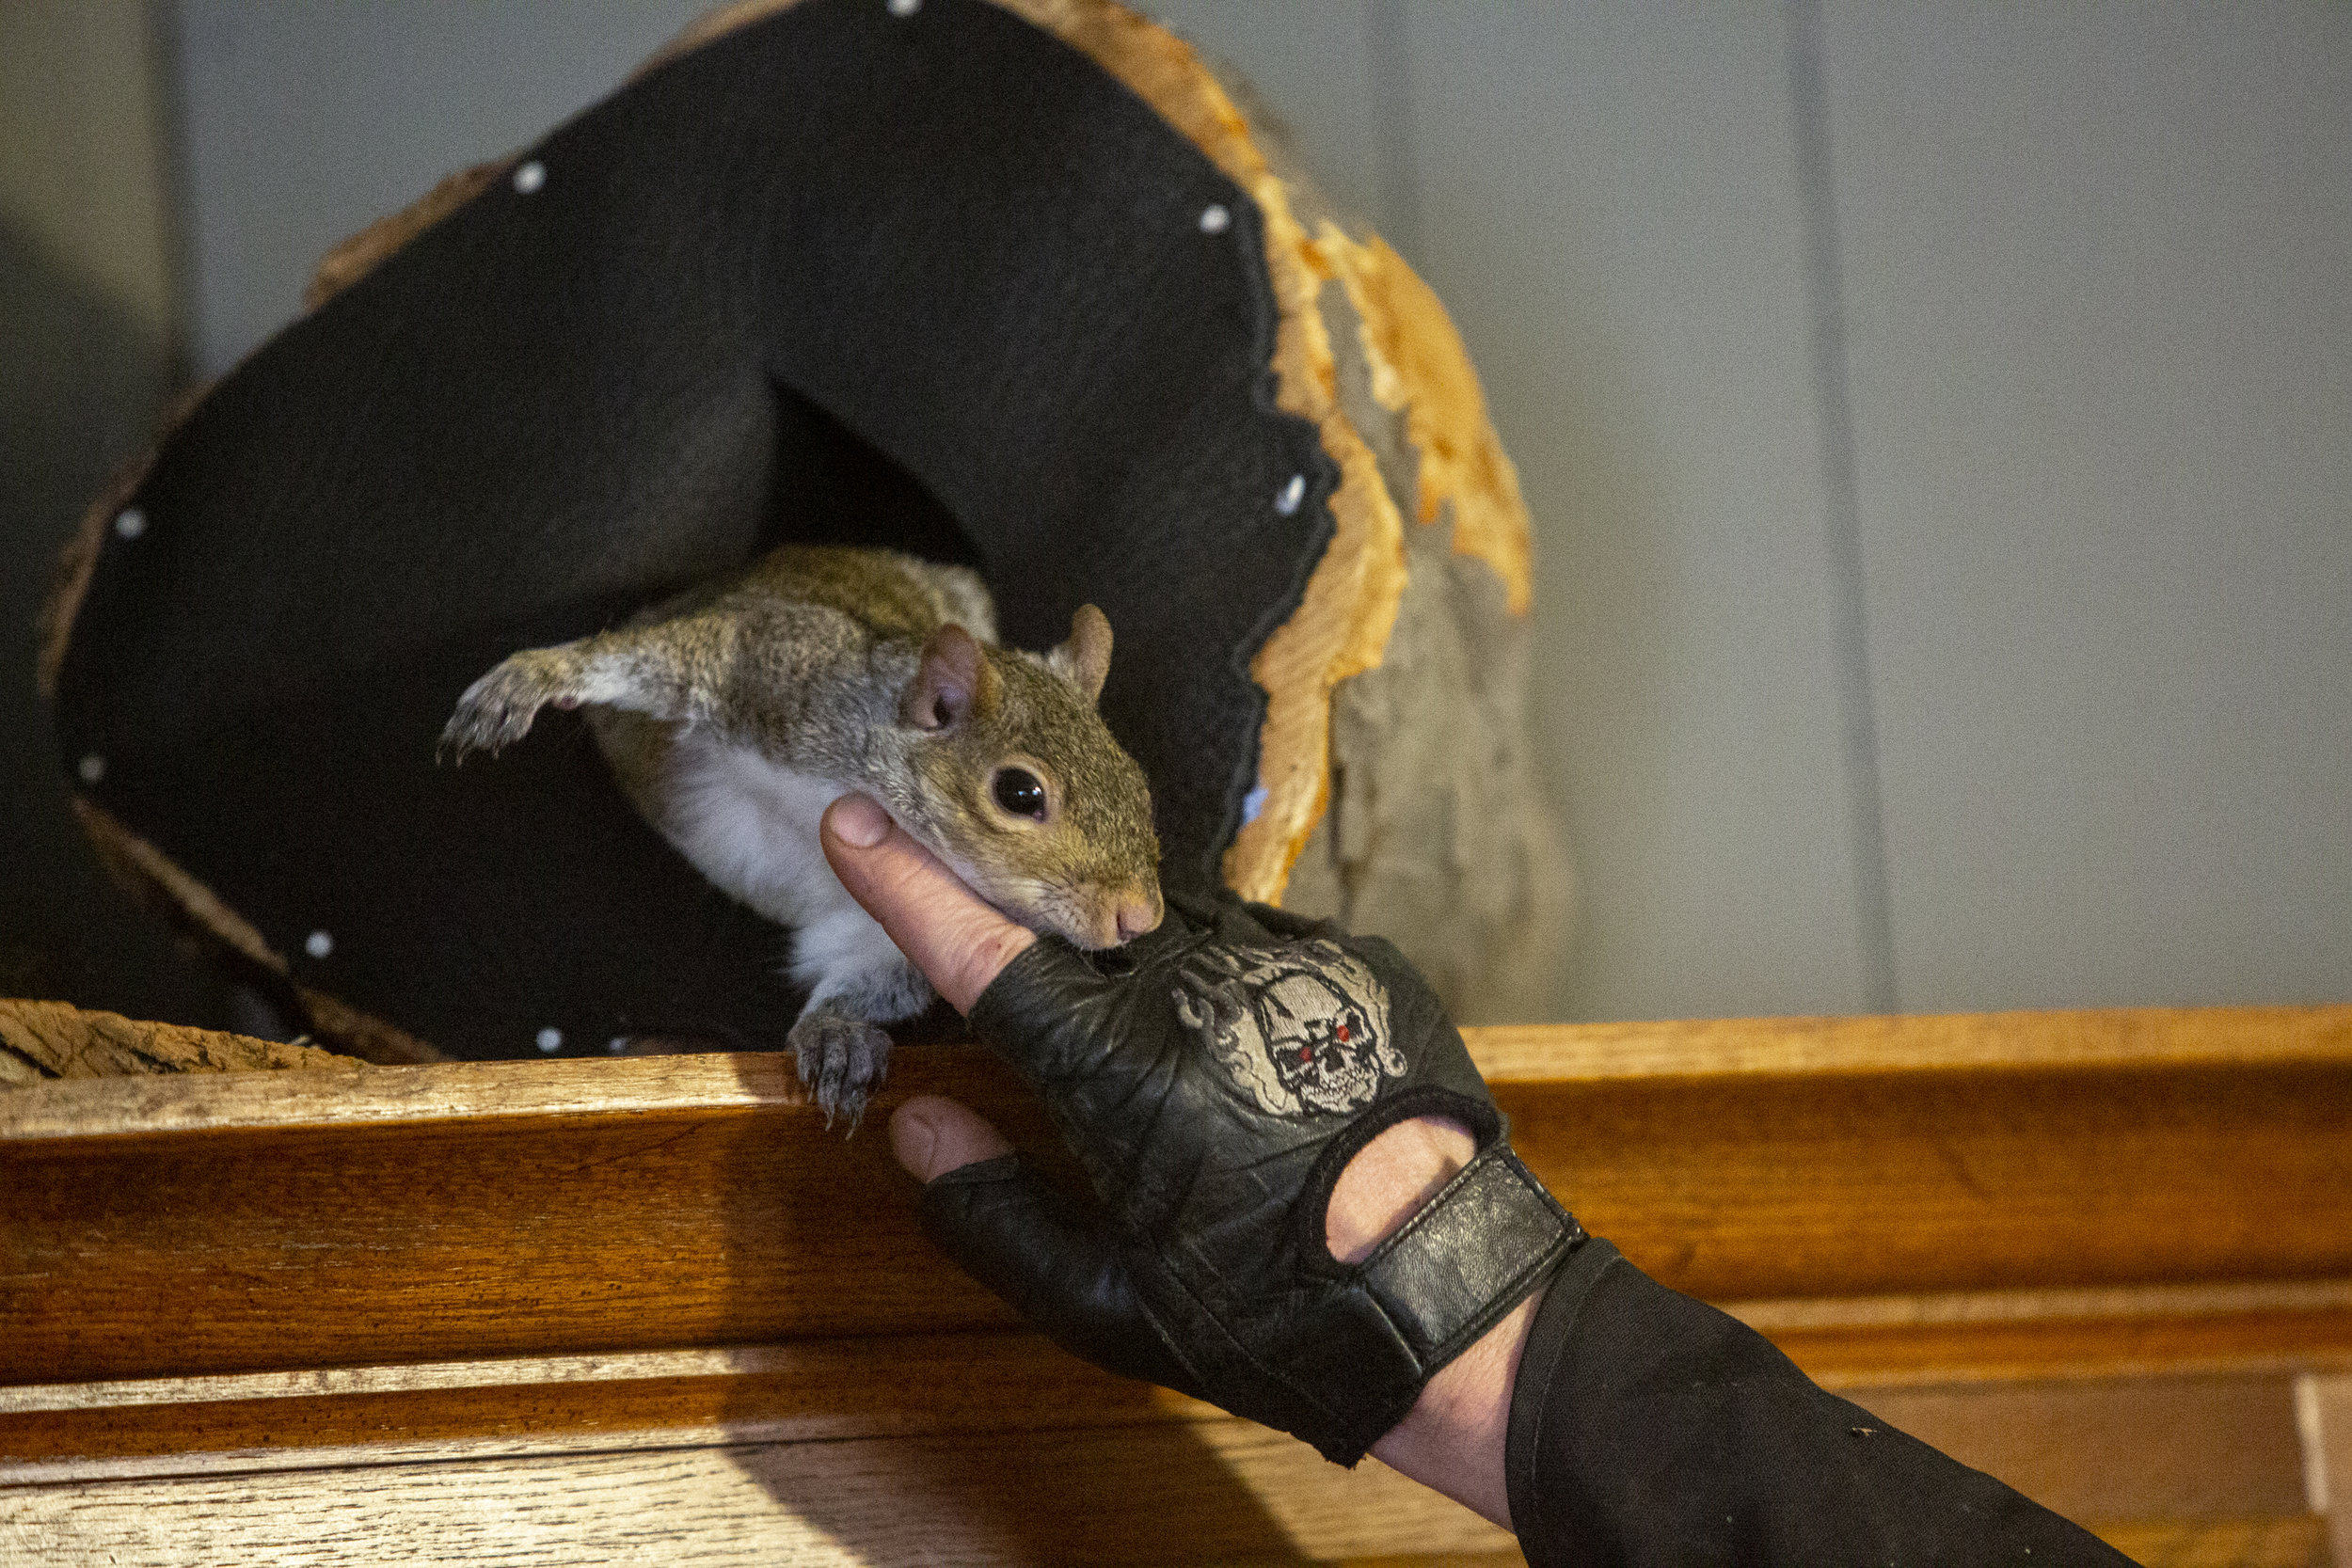  Tiny the squirrel emerges from his indoor, manmade nest to receive affection from his owner. Residents of Sharpsburg cite the freedom to do as they please, without the judgement of neighbors, as one of the perks of living in this rural area. 